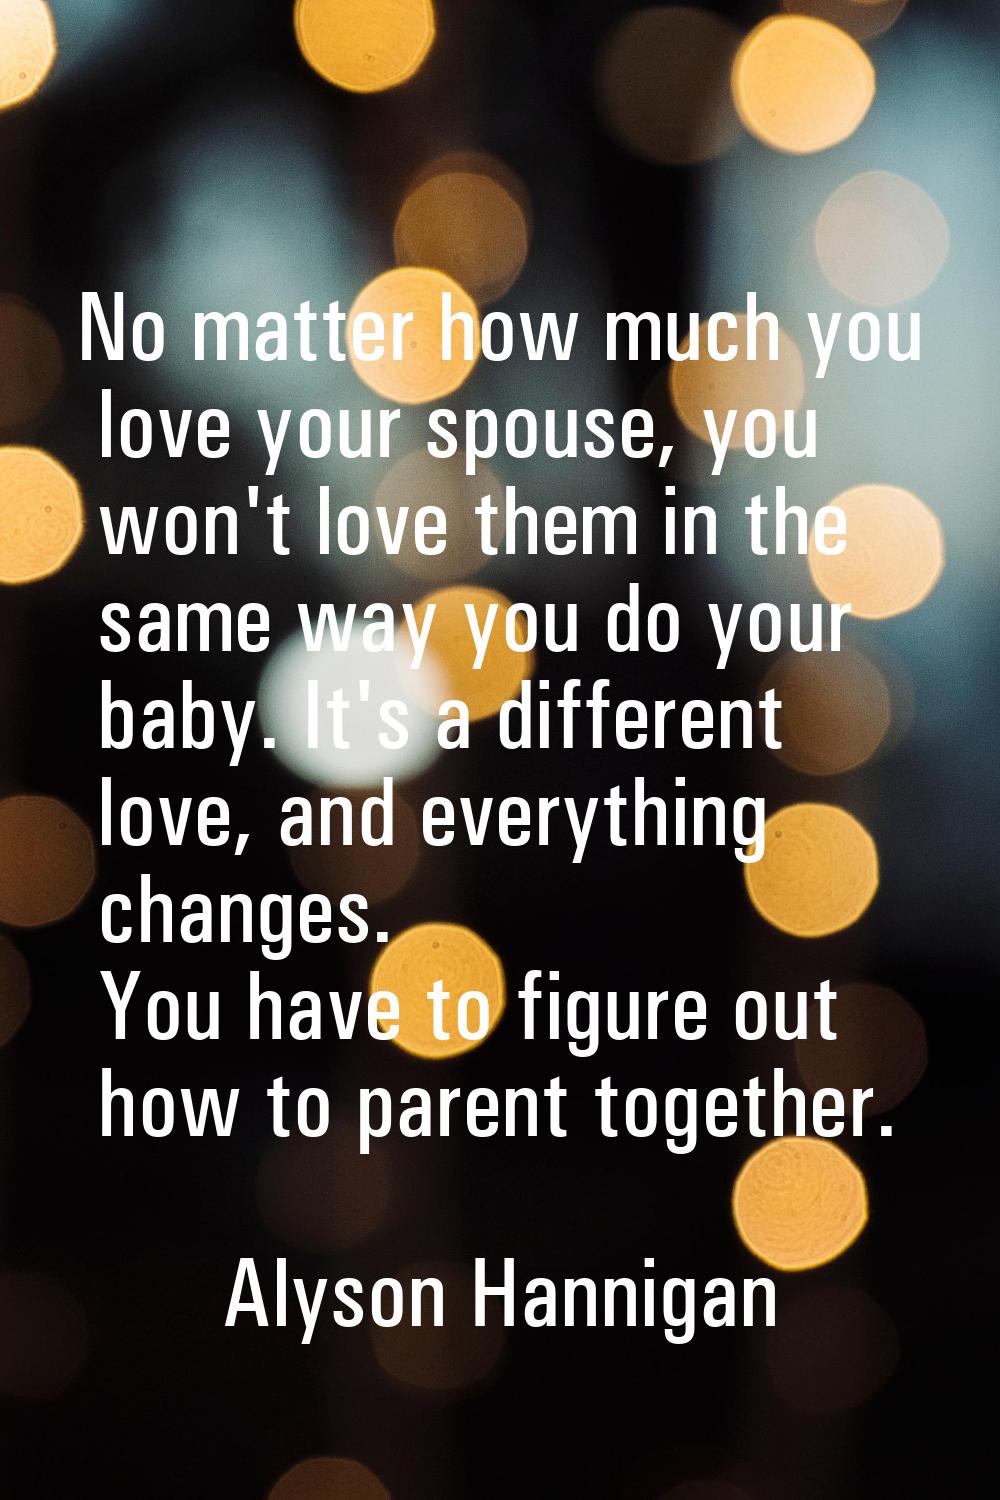 No matter how much you love your spouse, you won't love them in the same way you do your baby. It's